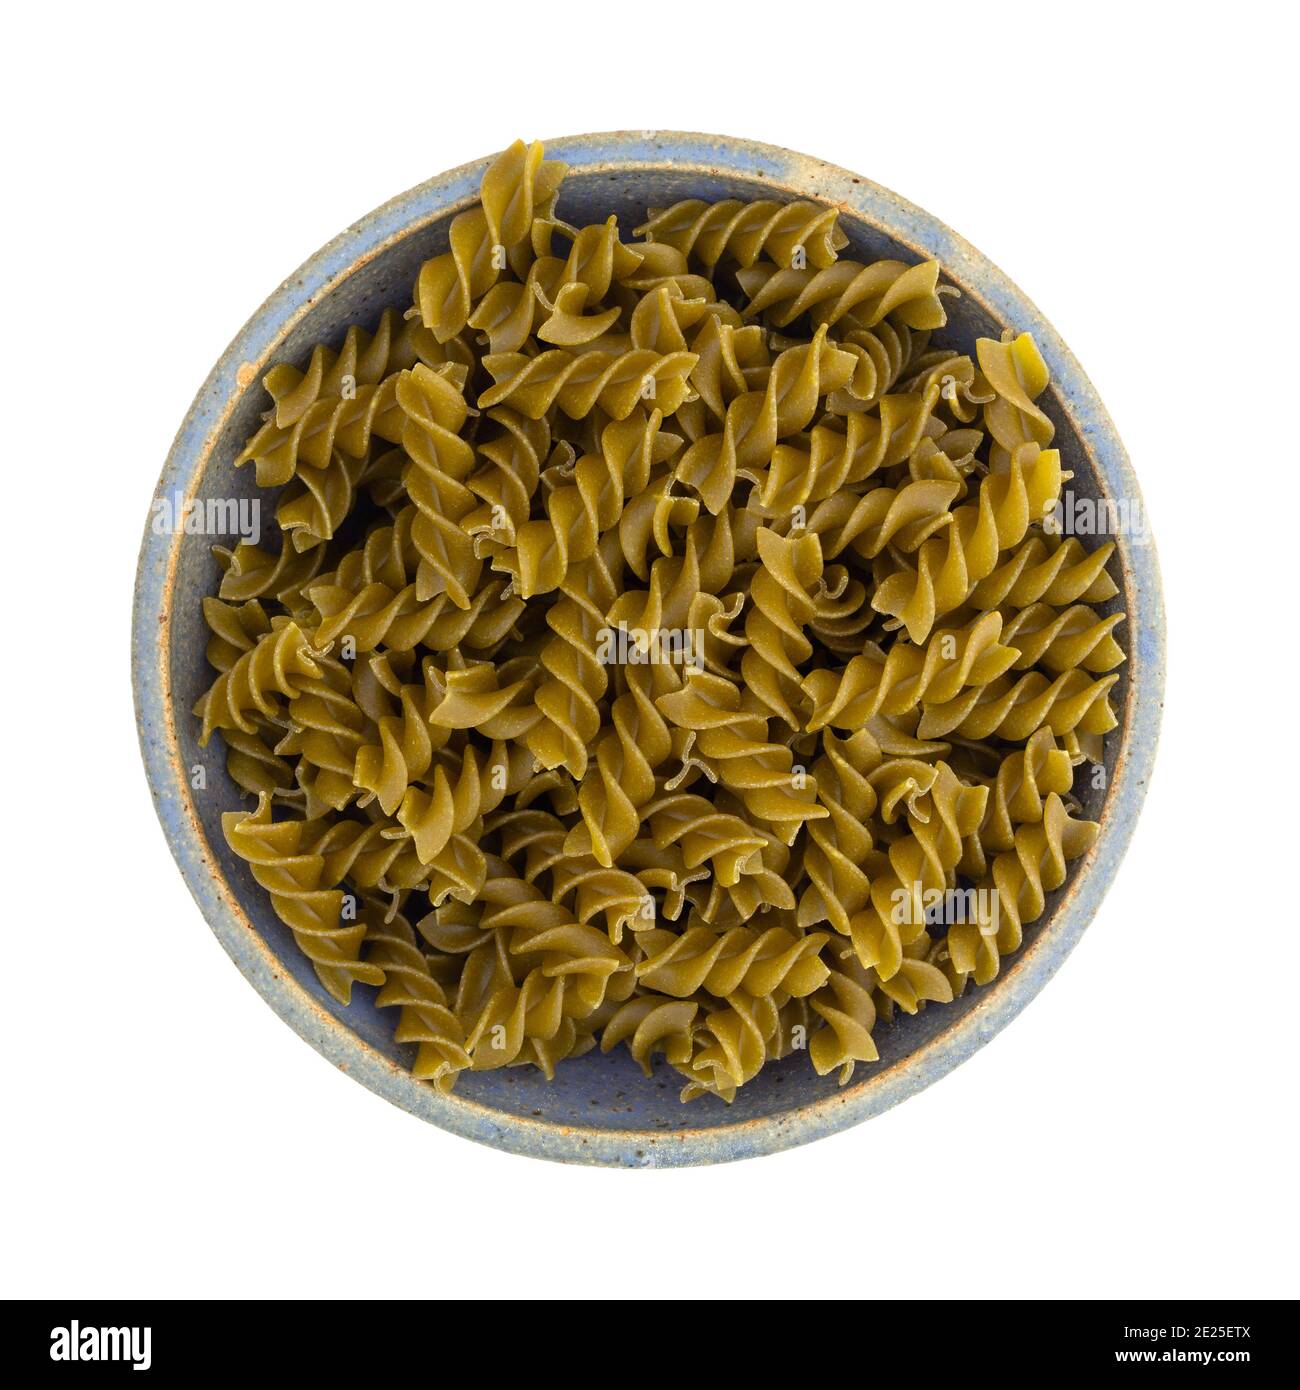 Top view of a serving of a serving of green pea fusilli in an old blue stoneware bowl isolated on a white background. Stock Photo